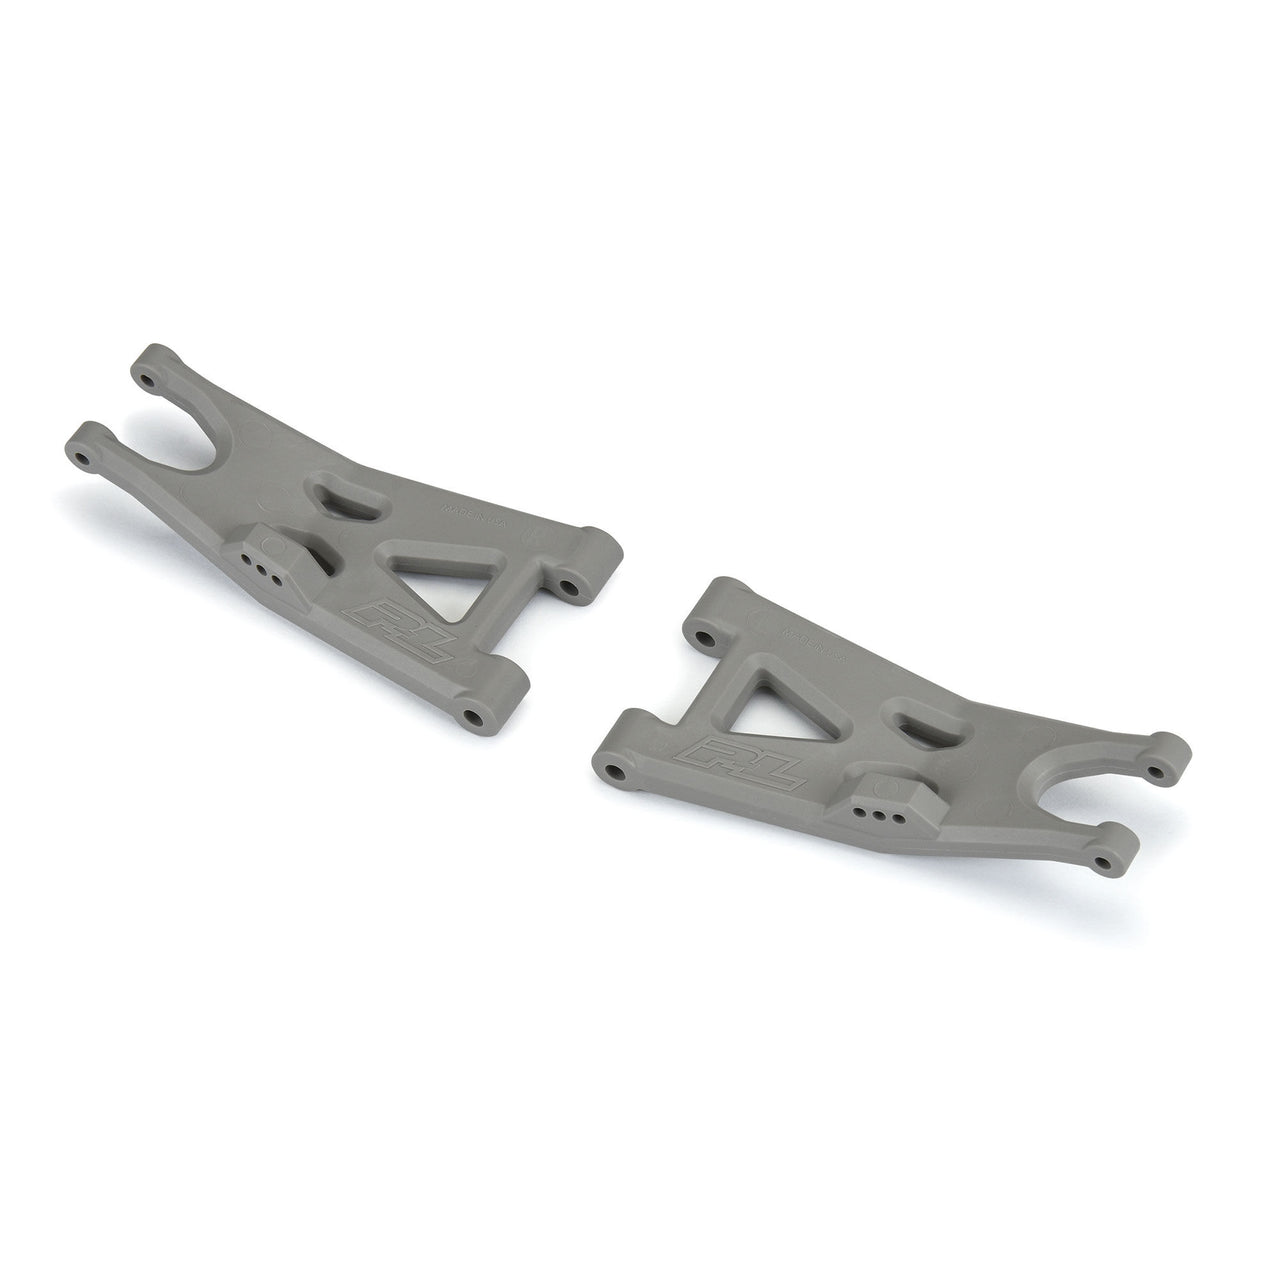 PRO639905 Bash Armor Front Suspension Arms (Stone Gray) for ARRMA 3S Vehicles